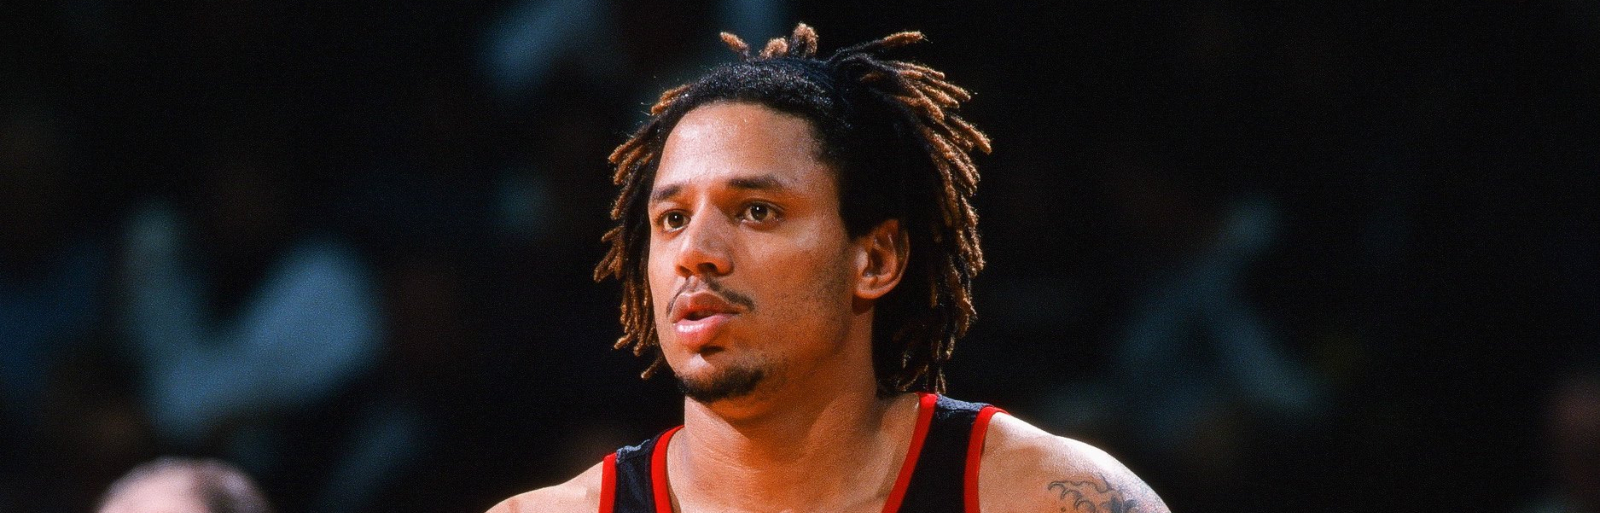 Brian Grant Won't Back Down From Parkinson's Disease - Sports